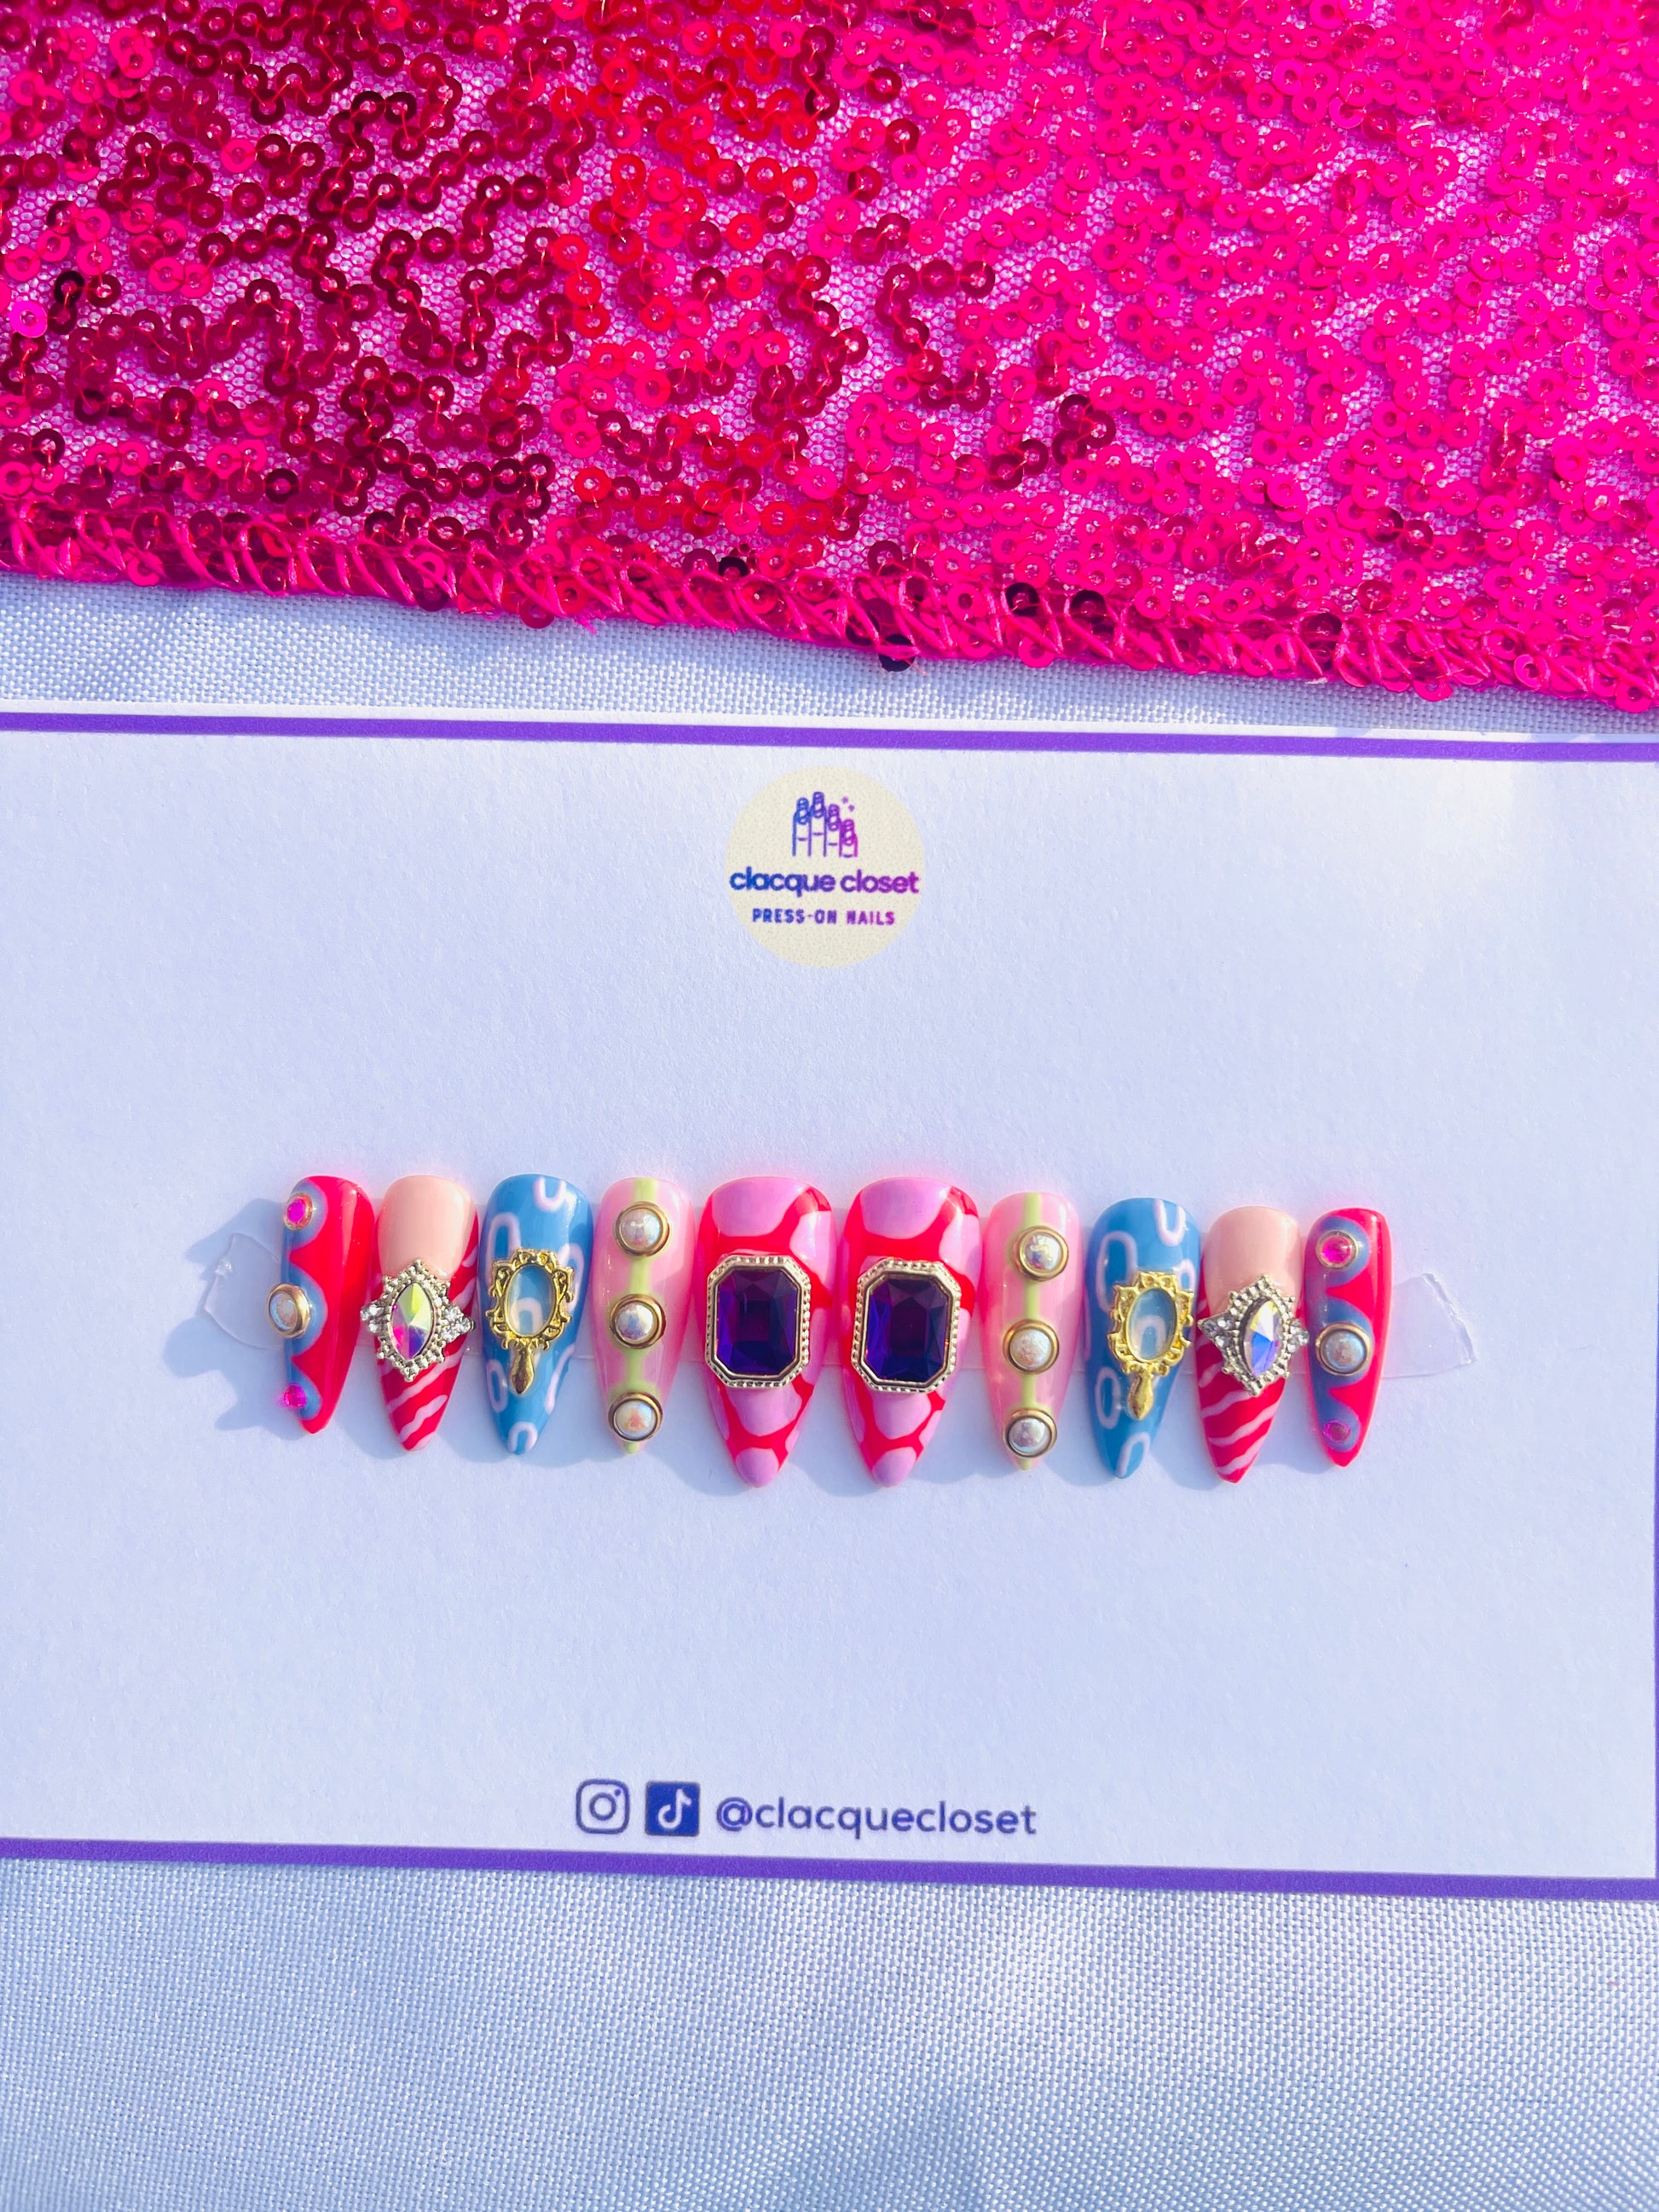 Medium-length stiletto nails featuring an extravagant set filled with various charms and abstract art designs, embodying a bold and artistic expression.